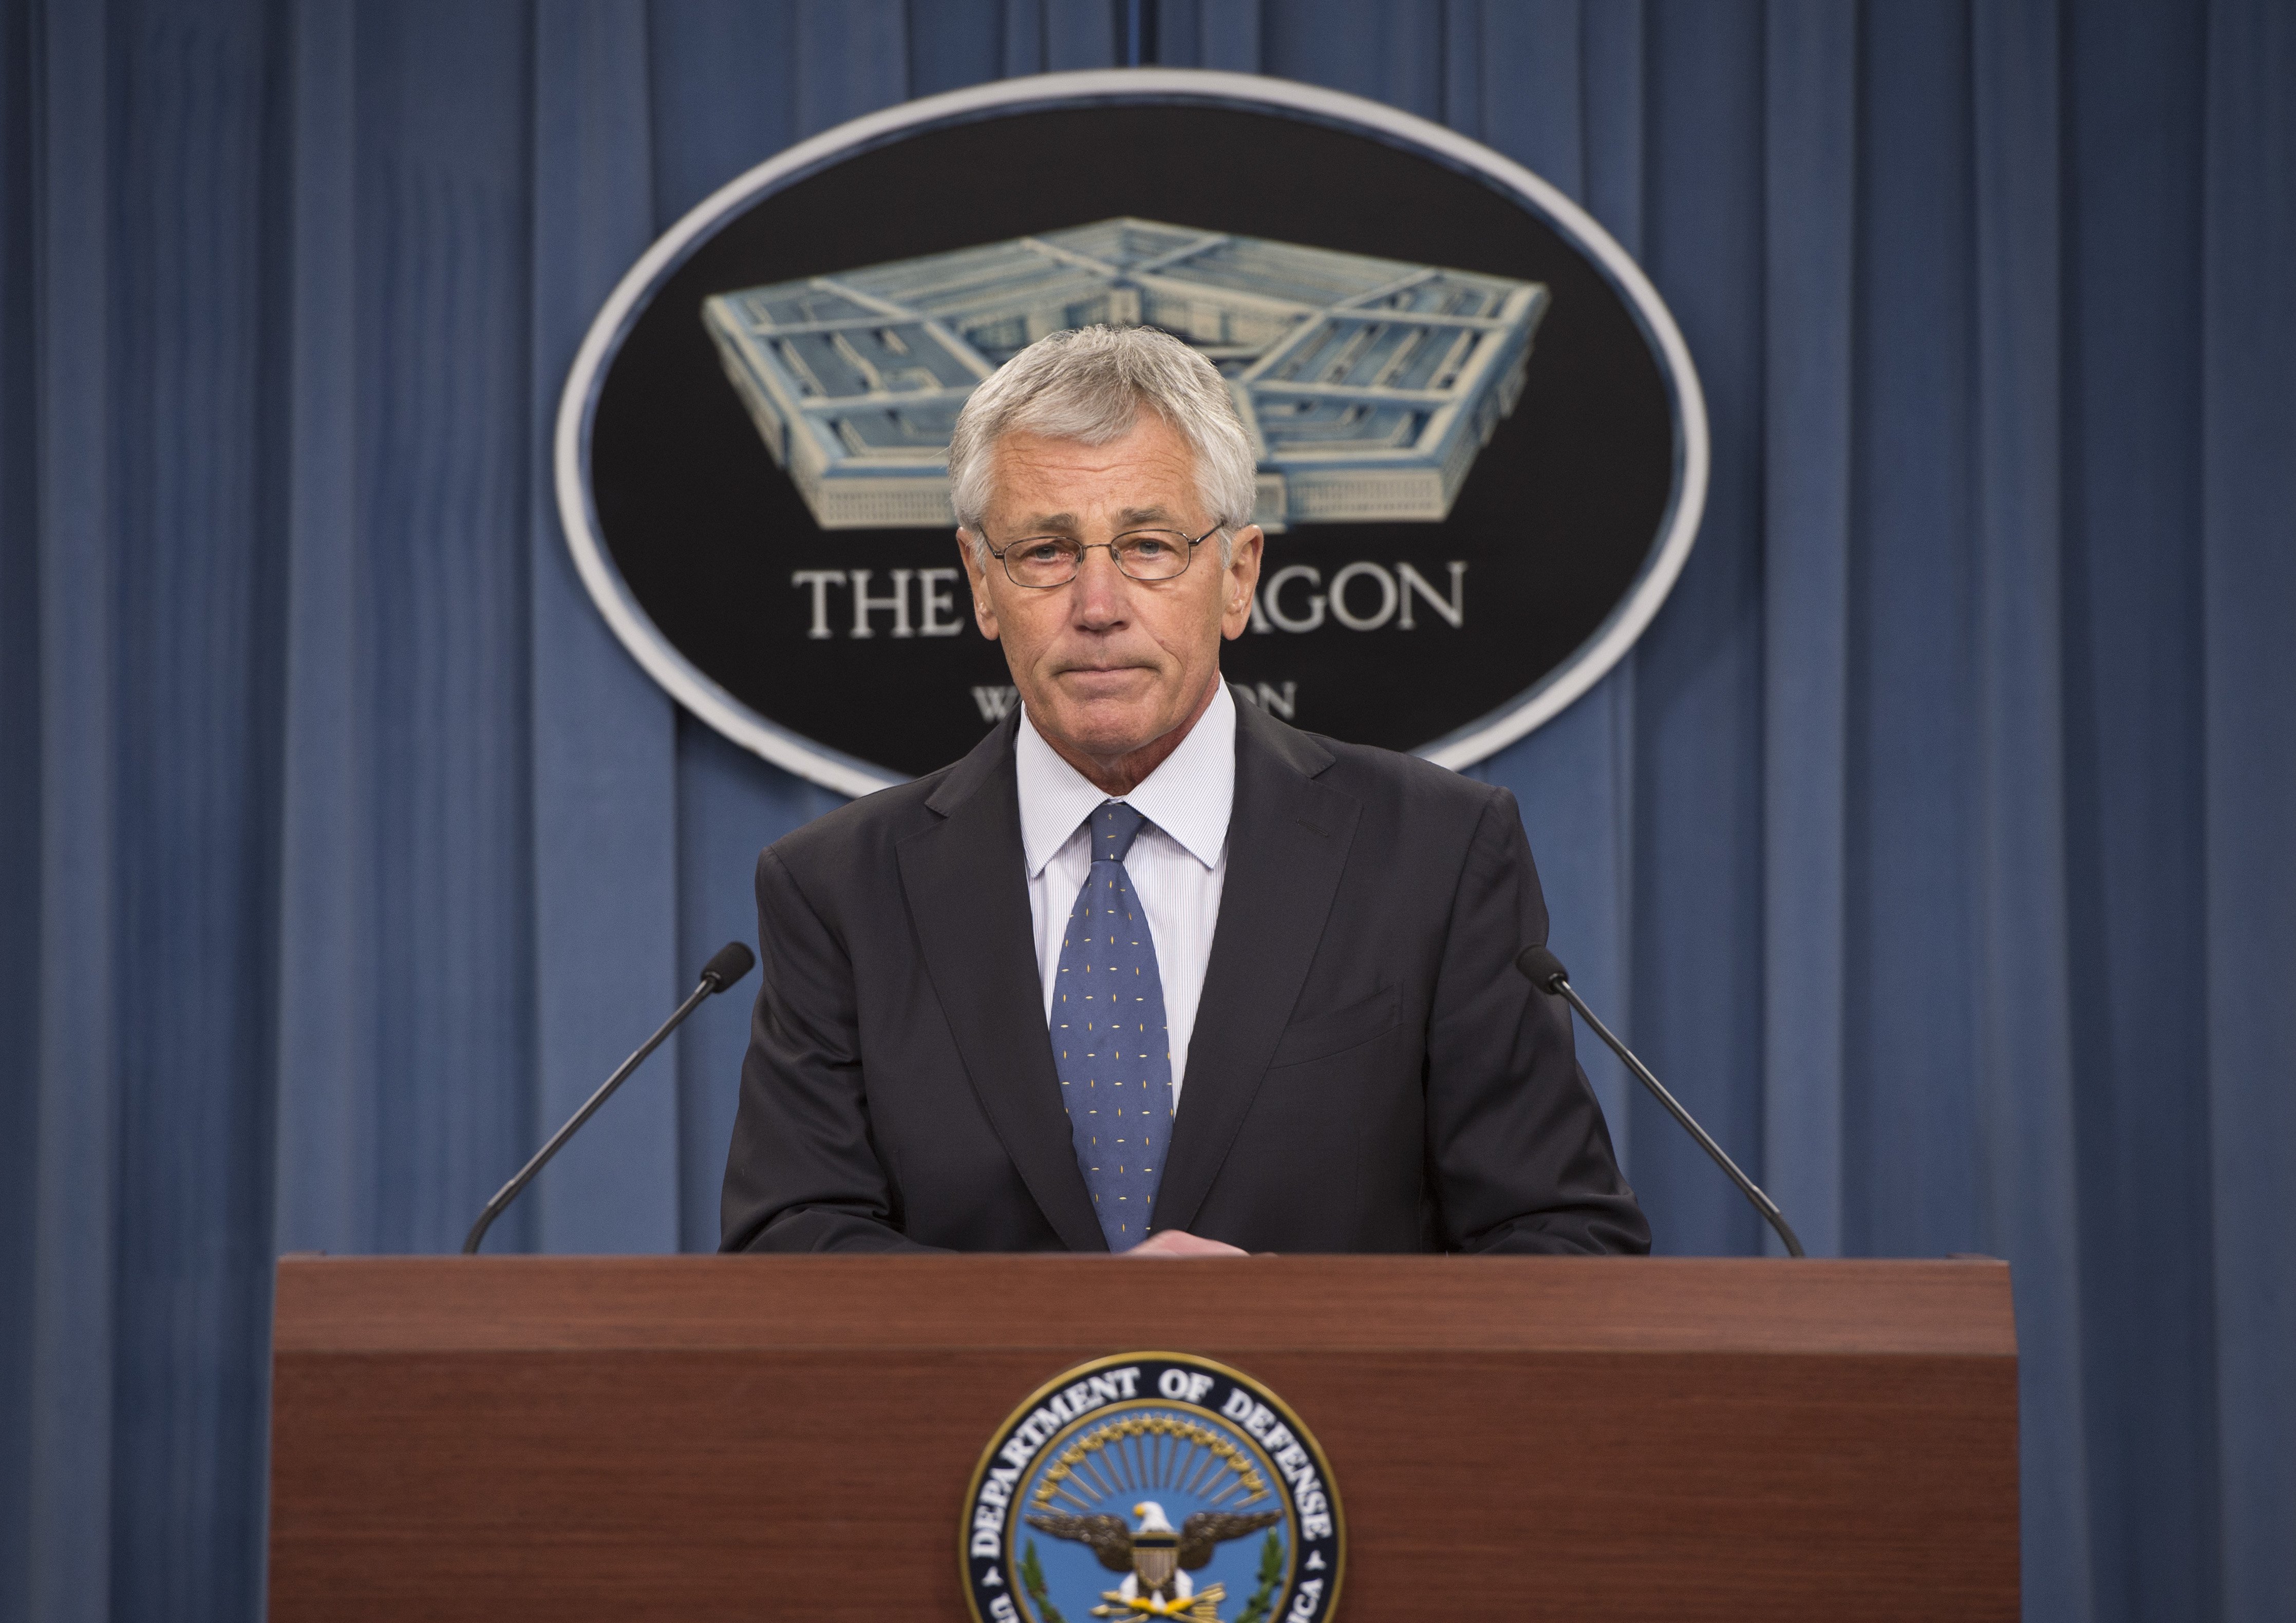 U.S. Defense Secretary Chuck Hagel meets with Pentagon media to outline a five year Pentagon budget what will shrink the Army forces and the rest of the DOD, on Feb. 24, 2014.